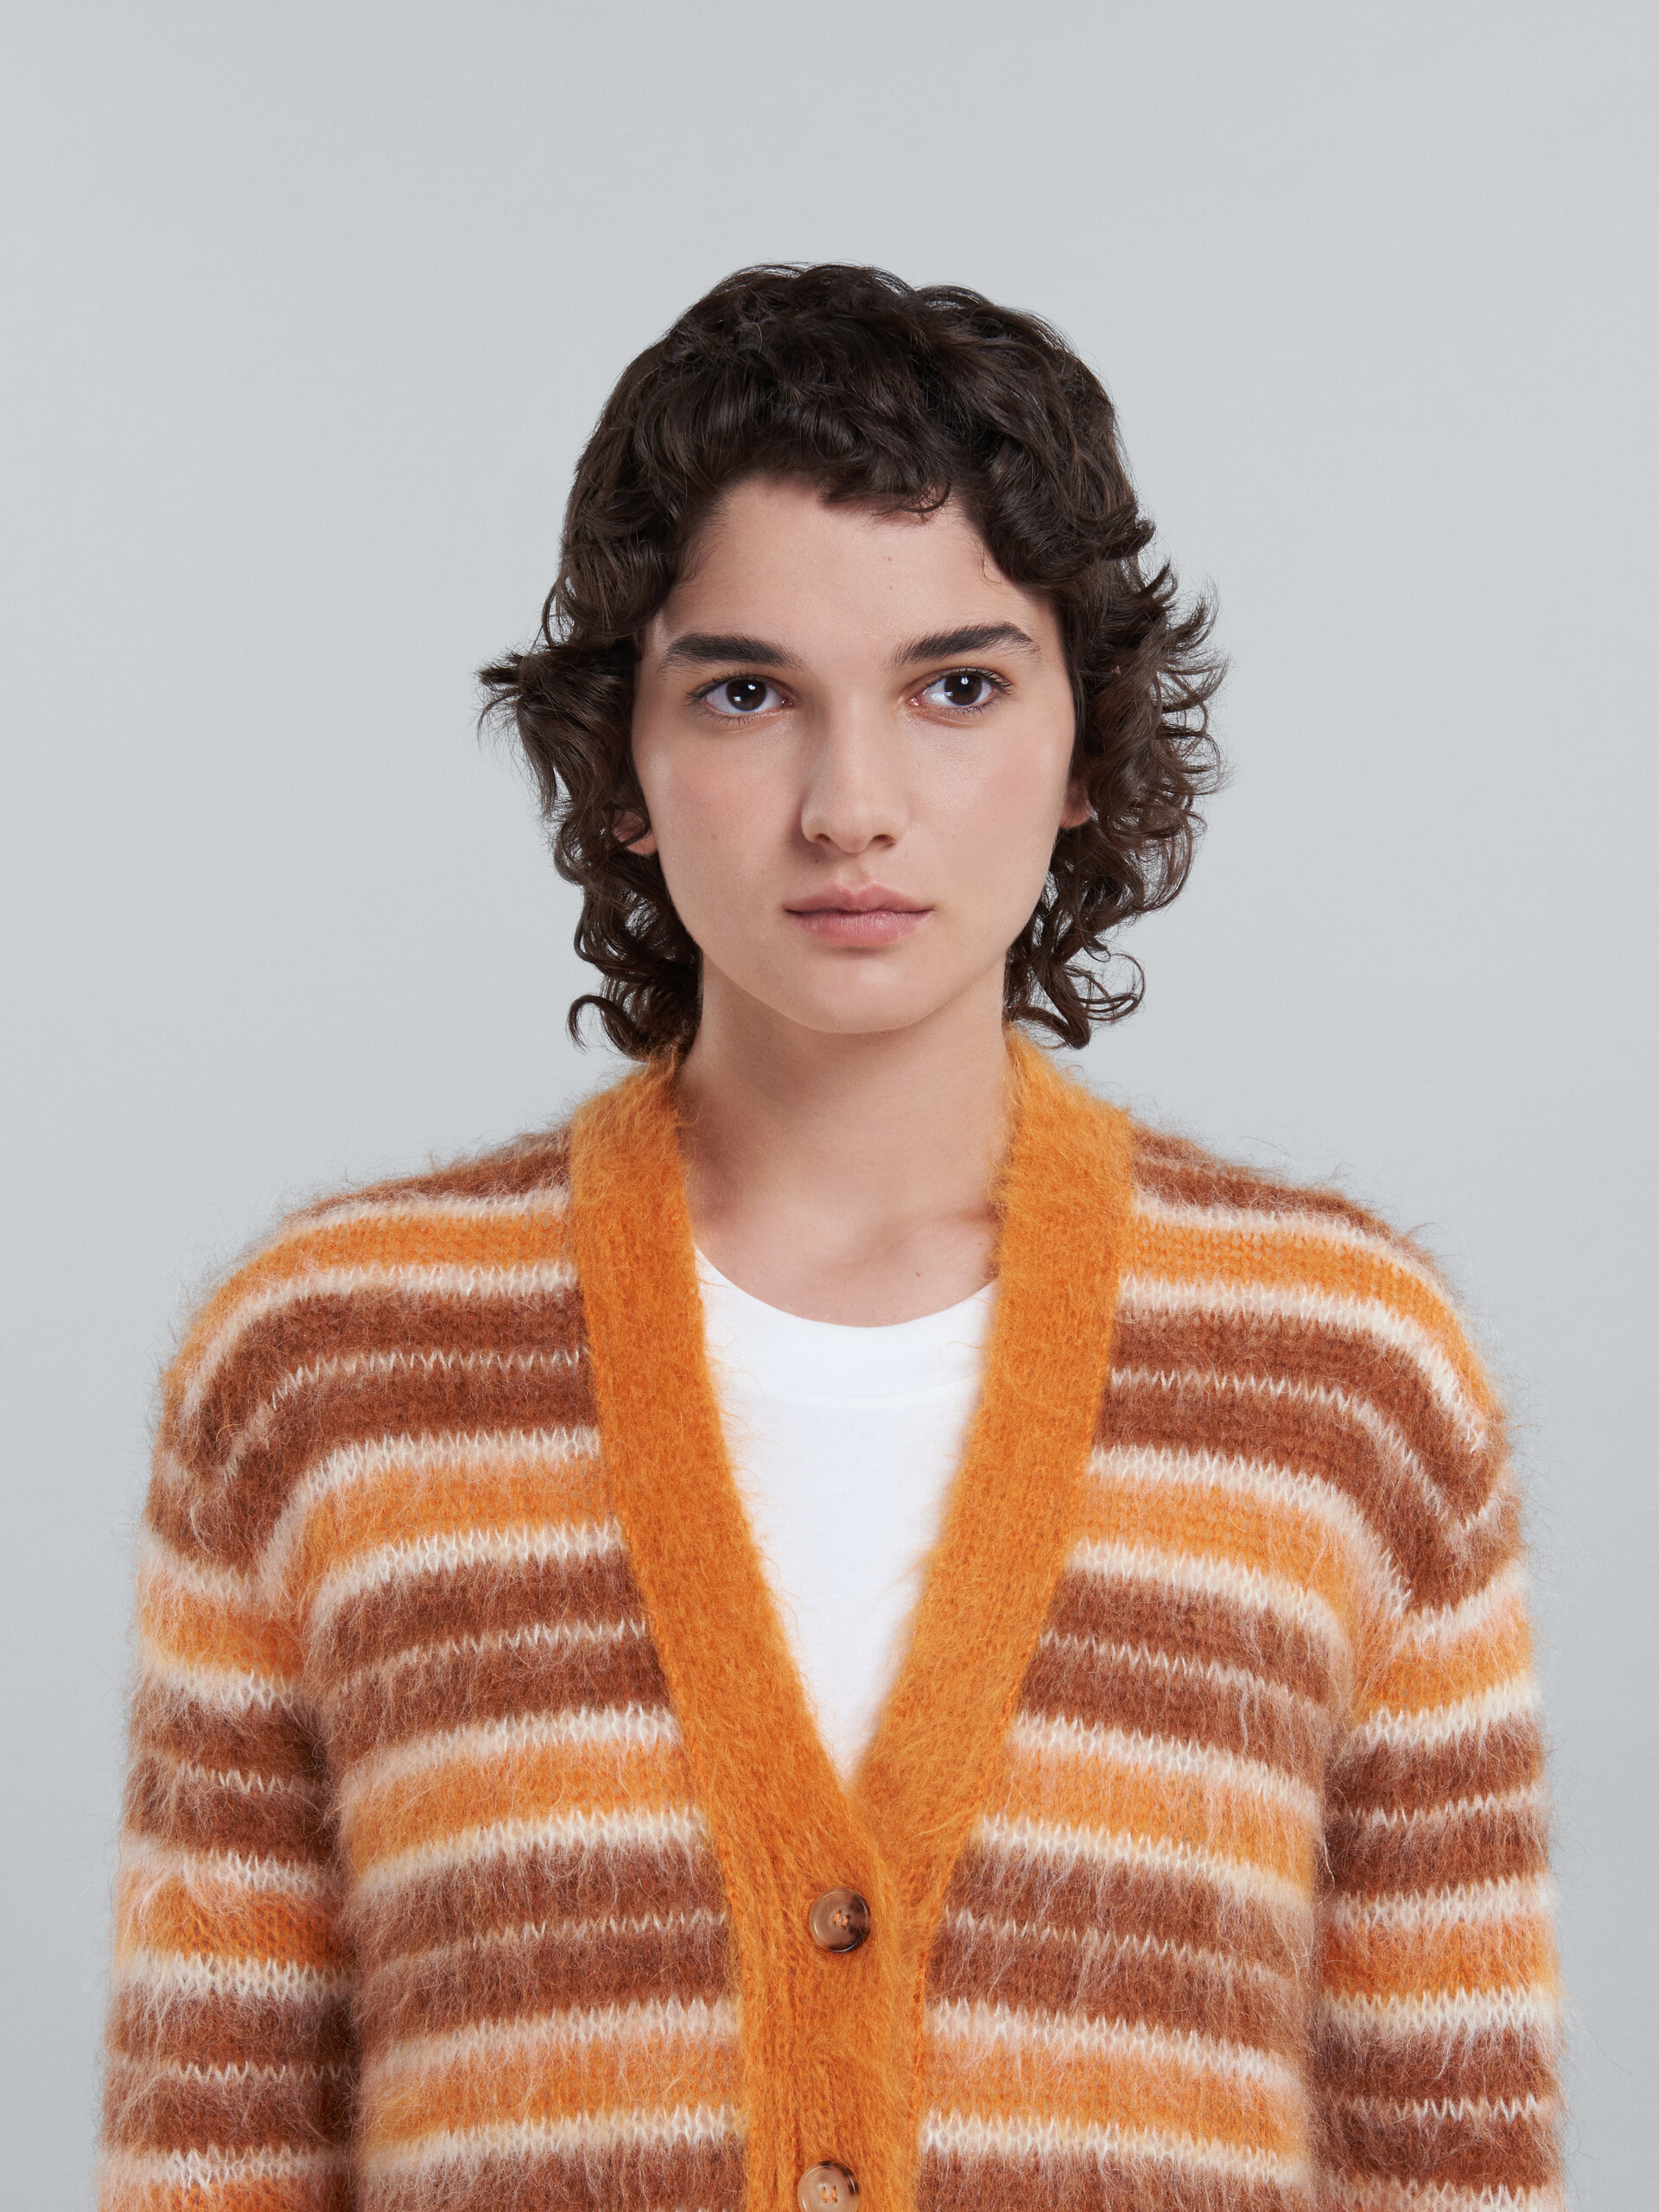 Mohair cardigan with orange stripes - Pullovers - Image 4